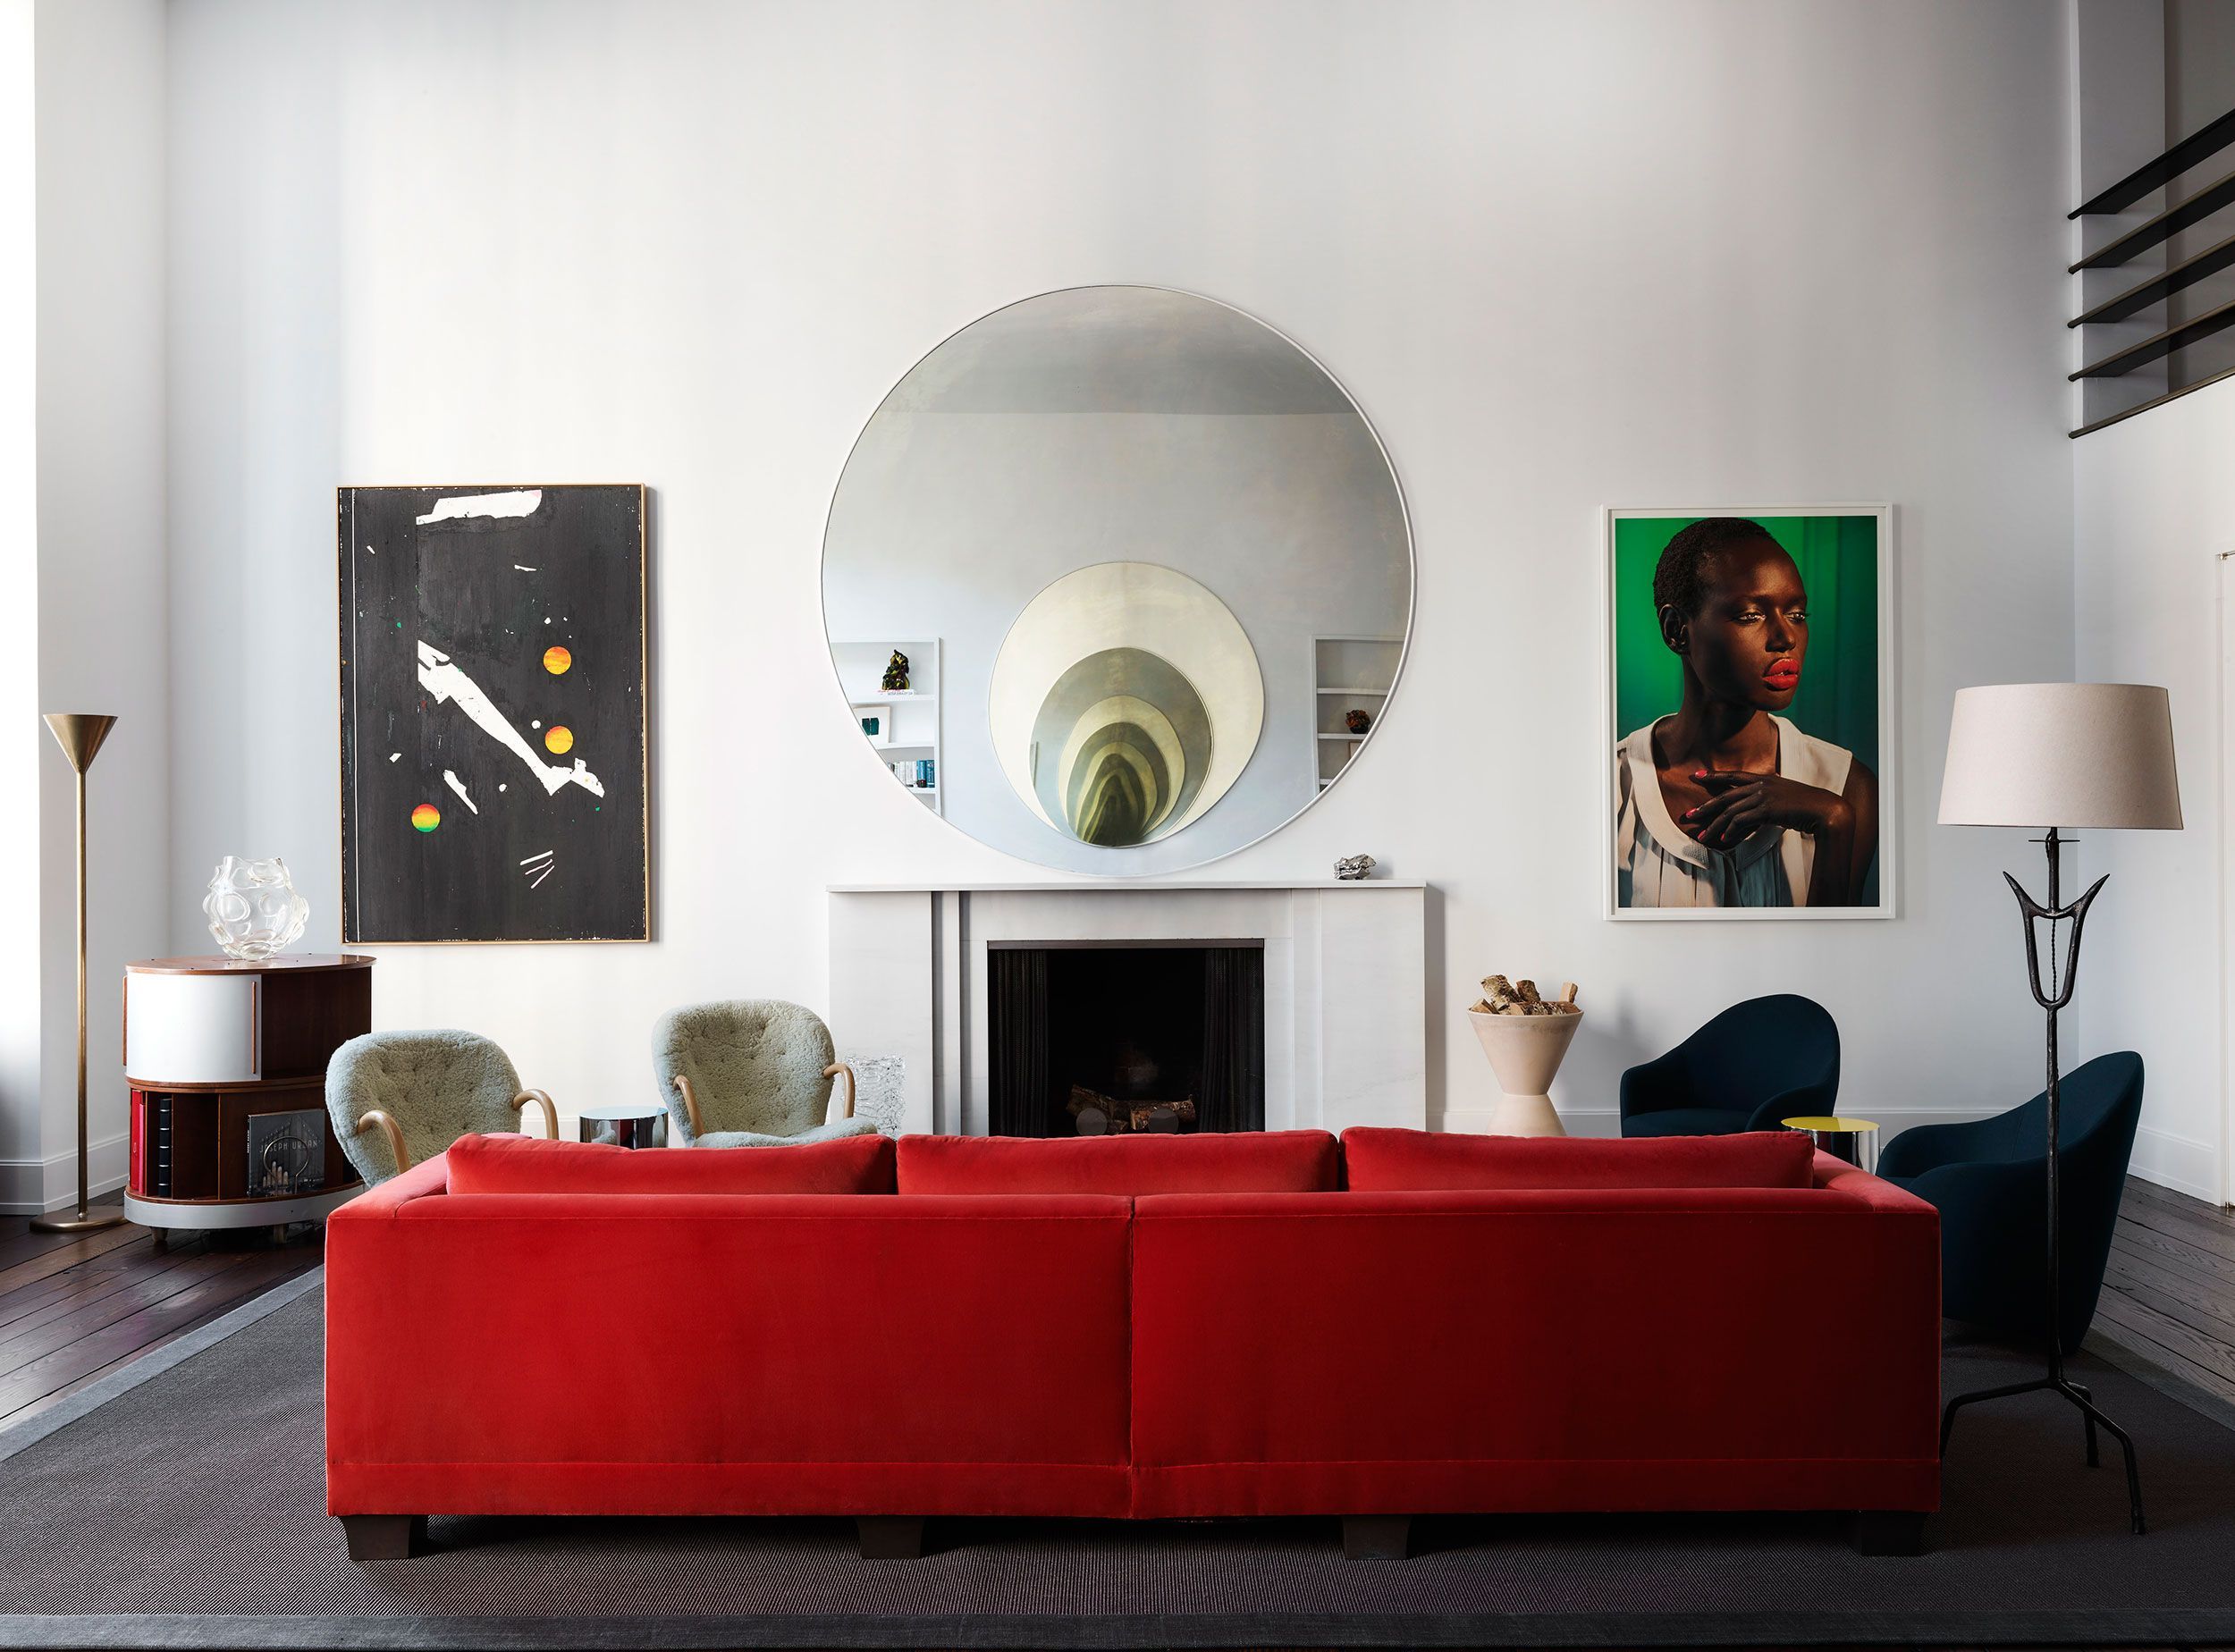 This Sultry New York Apartment Puts the 'Art' in Art Deco | Dorothy Berwin  Home